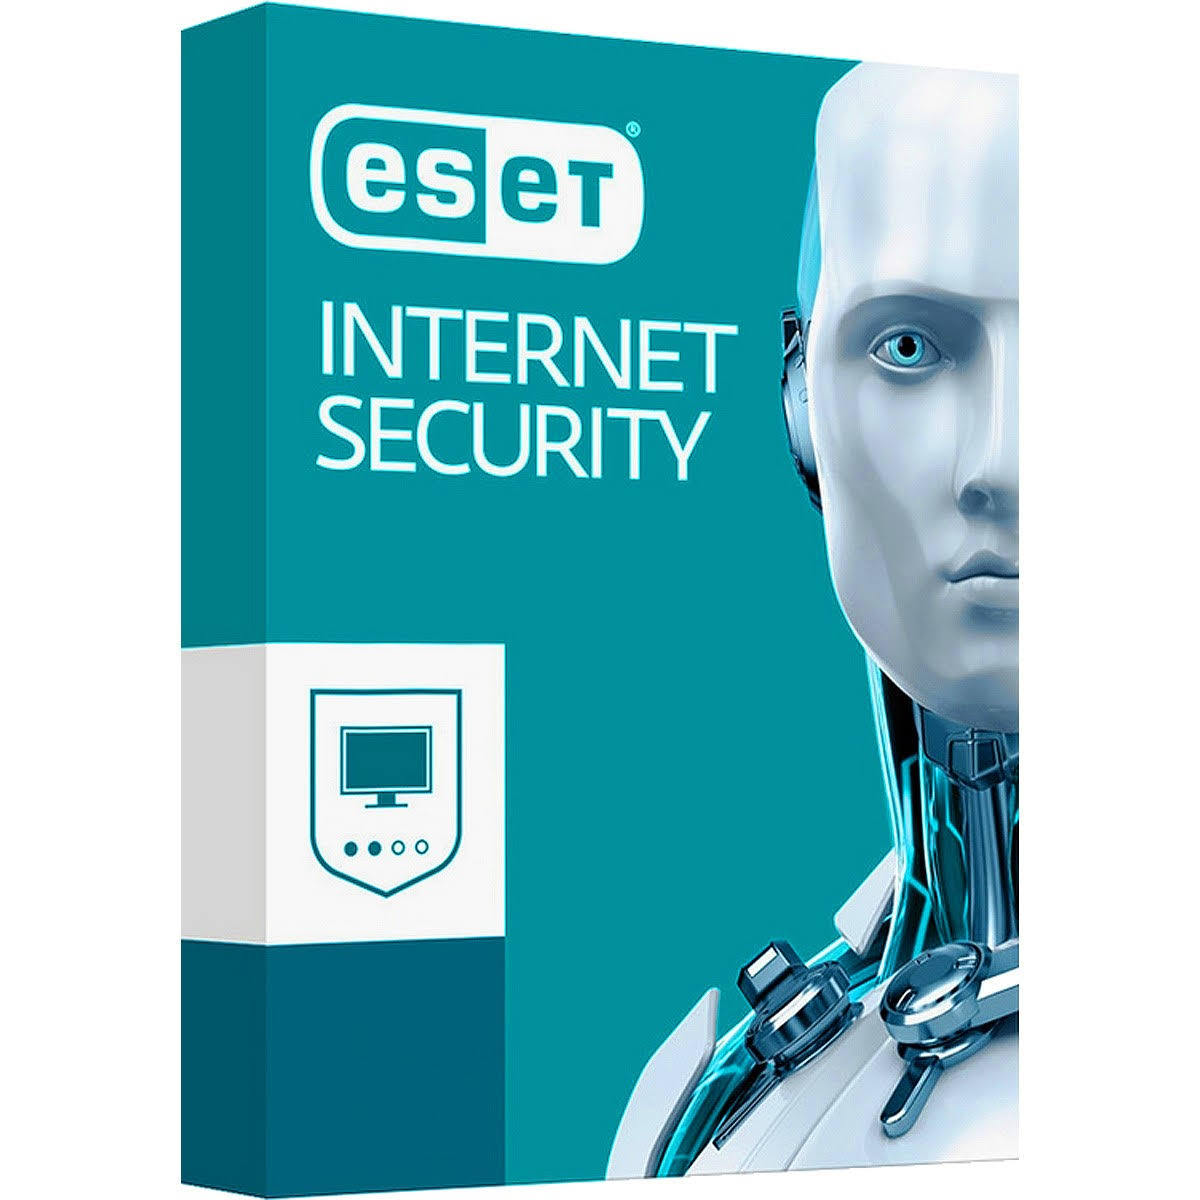 ESET Internet Security - Subscription license (1 year) - 3 users - Win